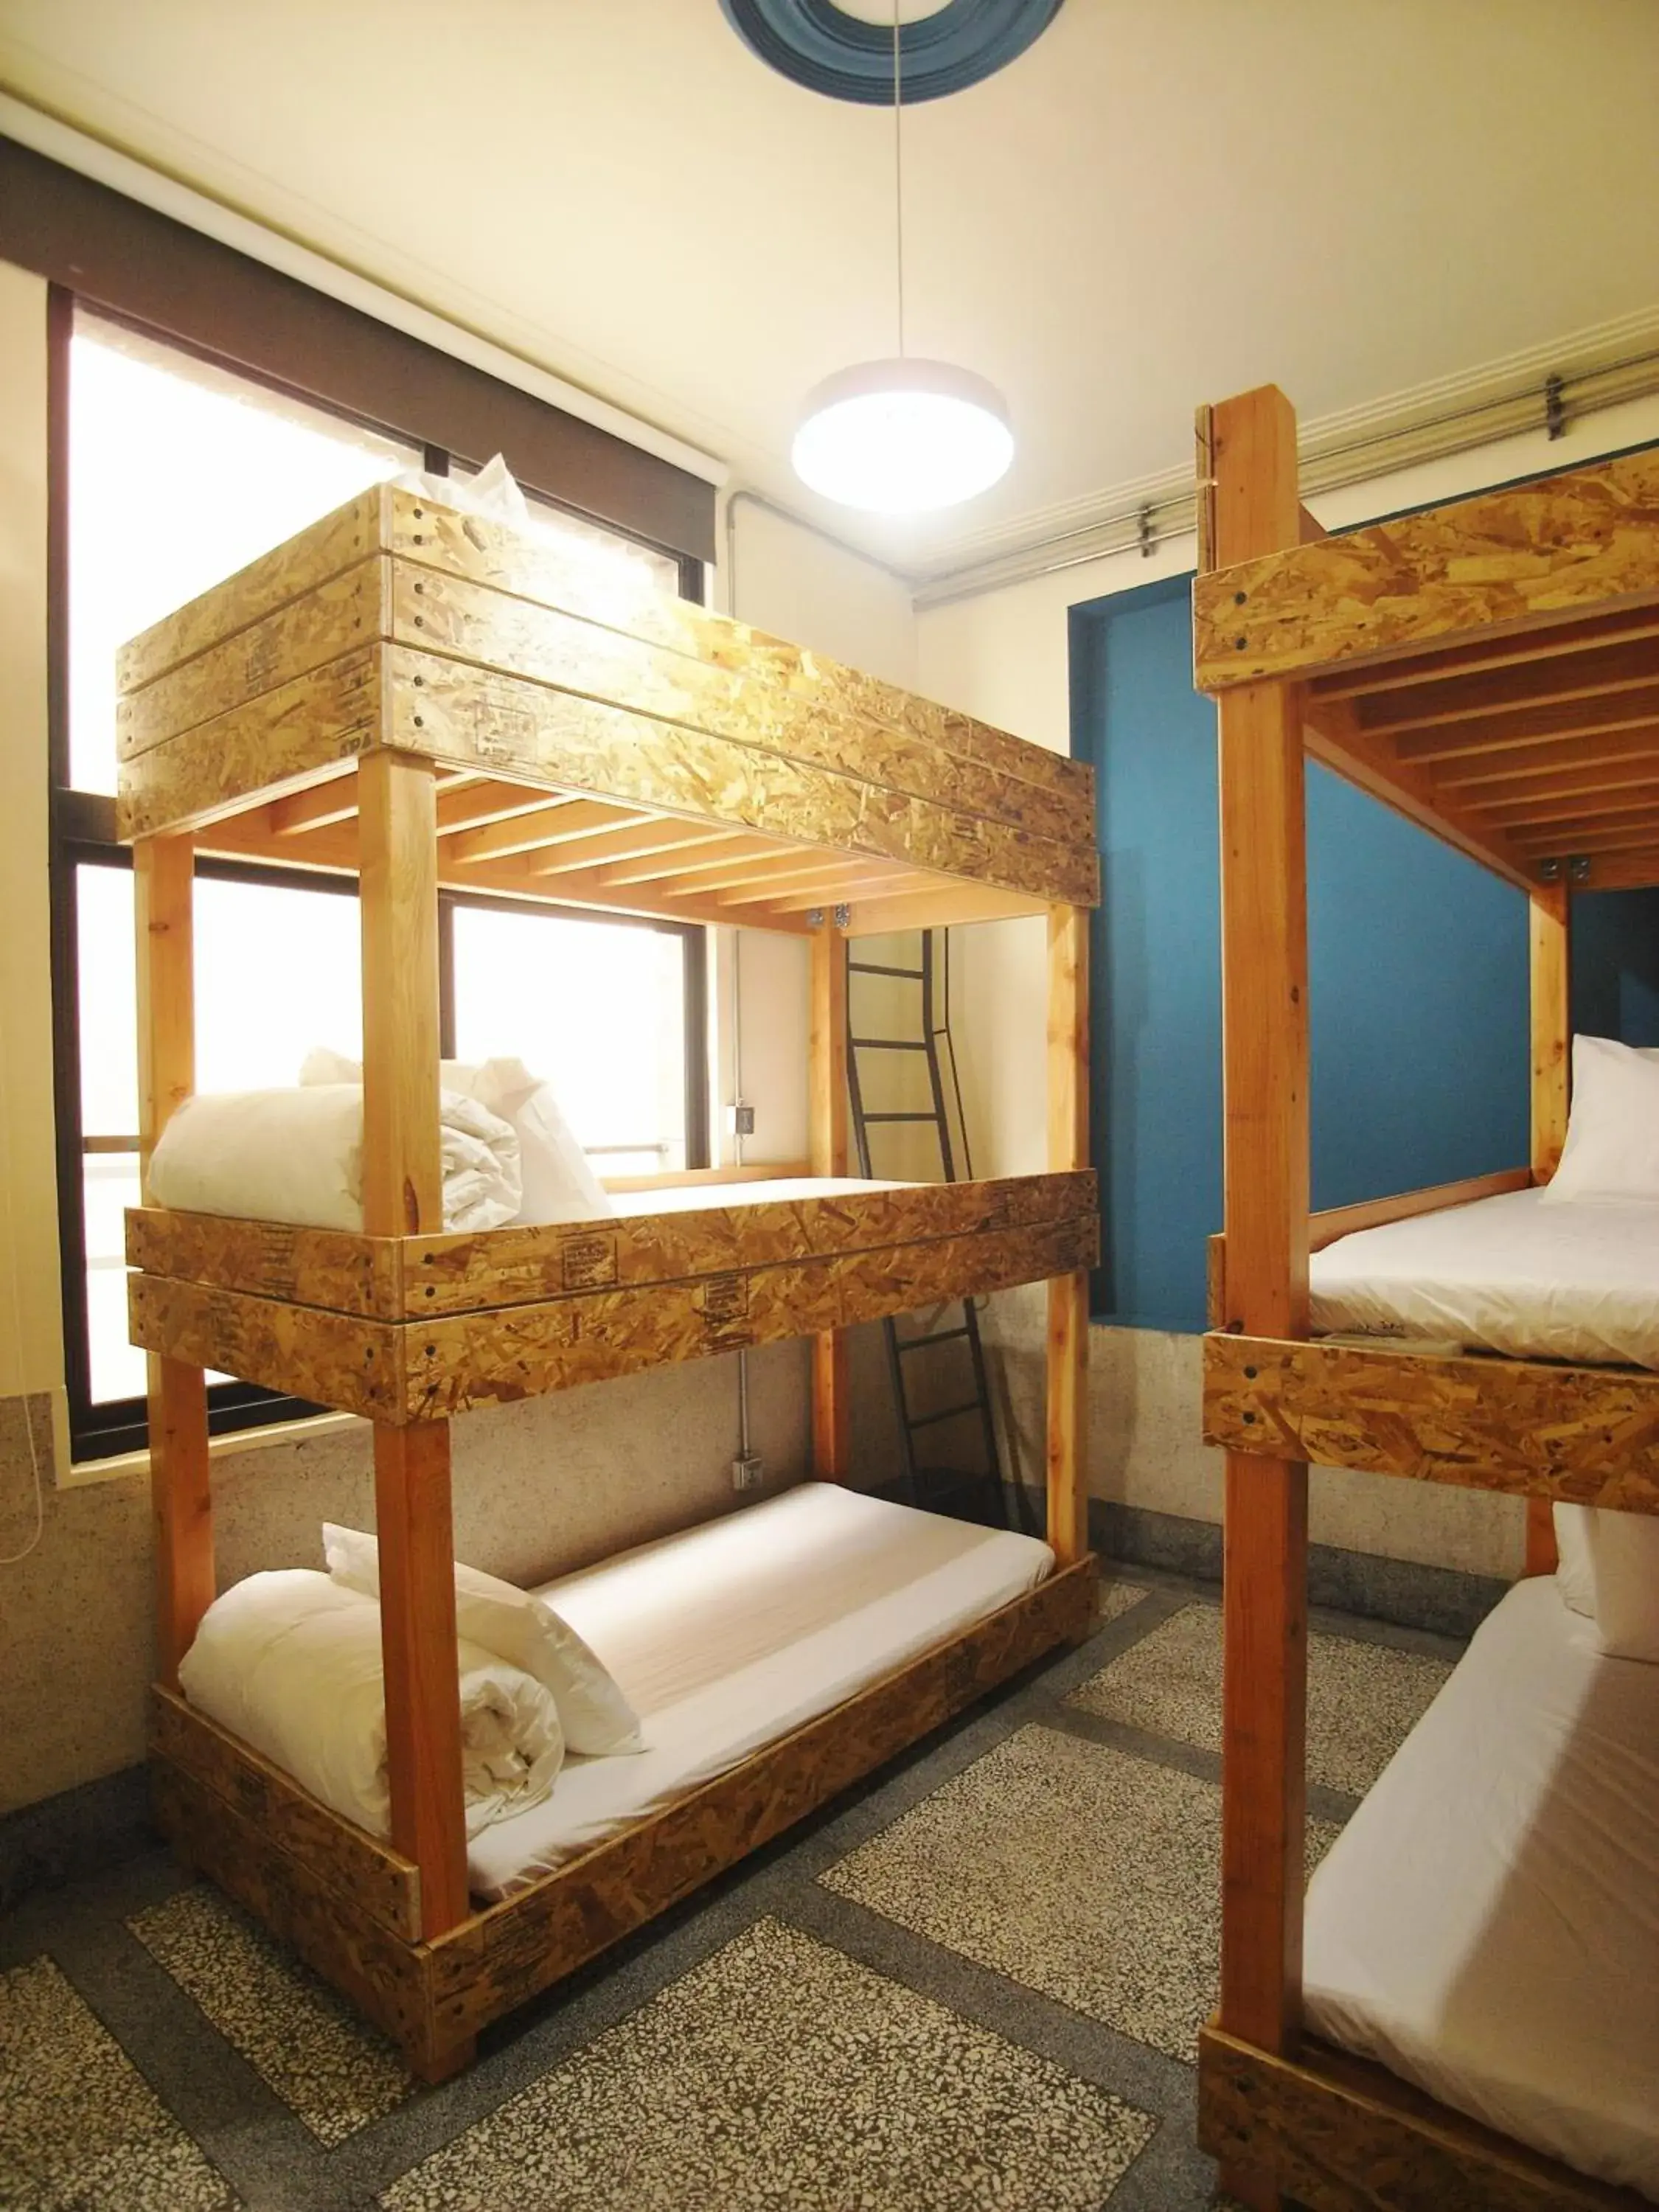 Bunk Bed in With Inn Hostel